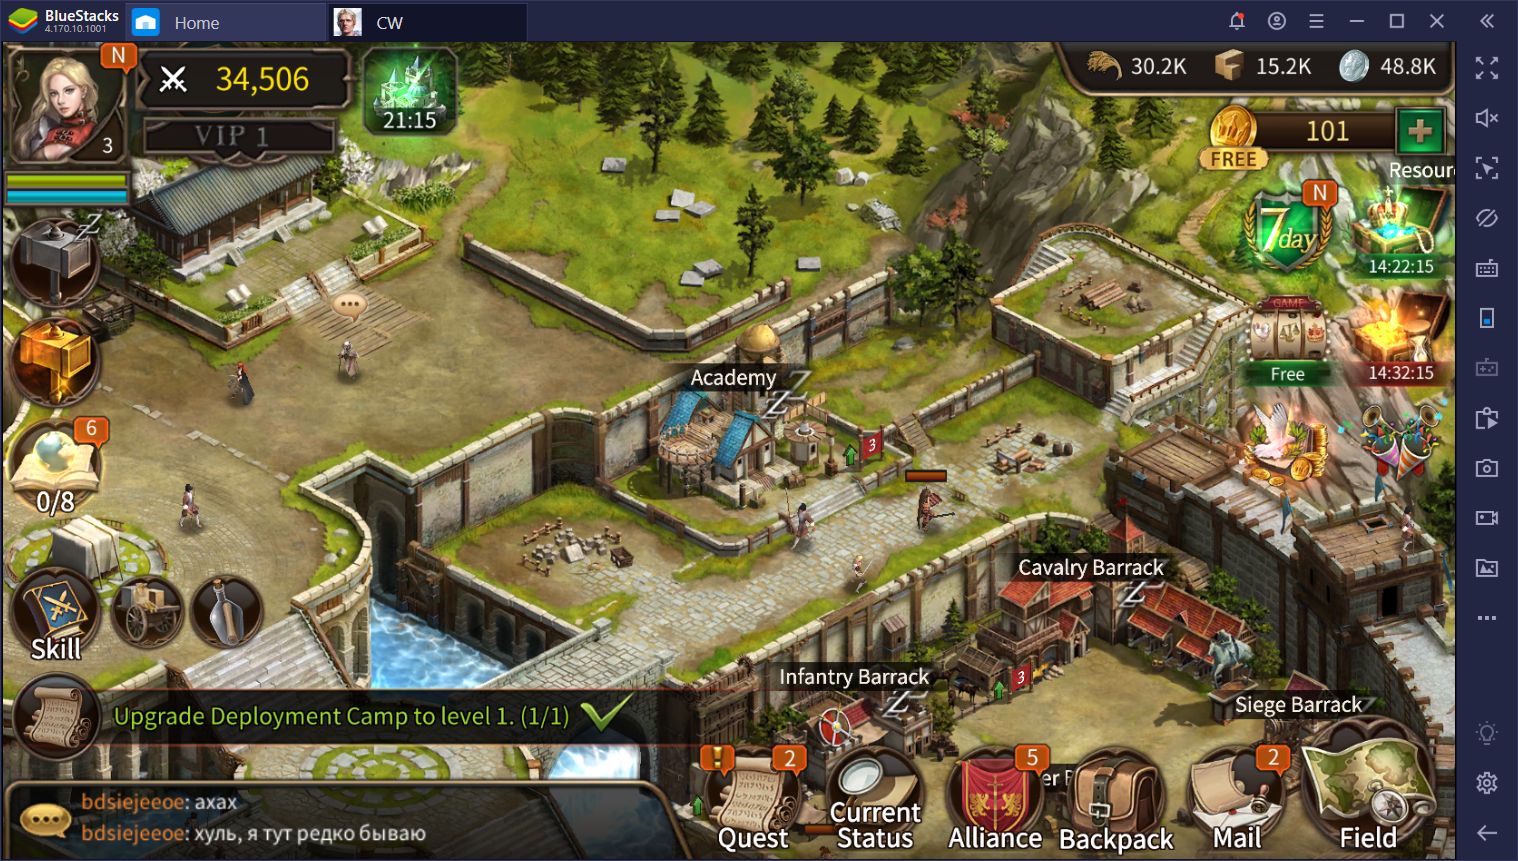 forge of empires defense not increasing after adding watchfire towers